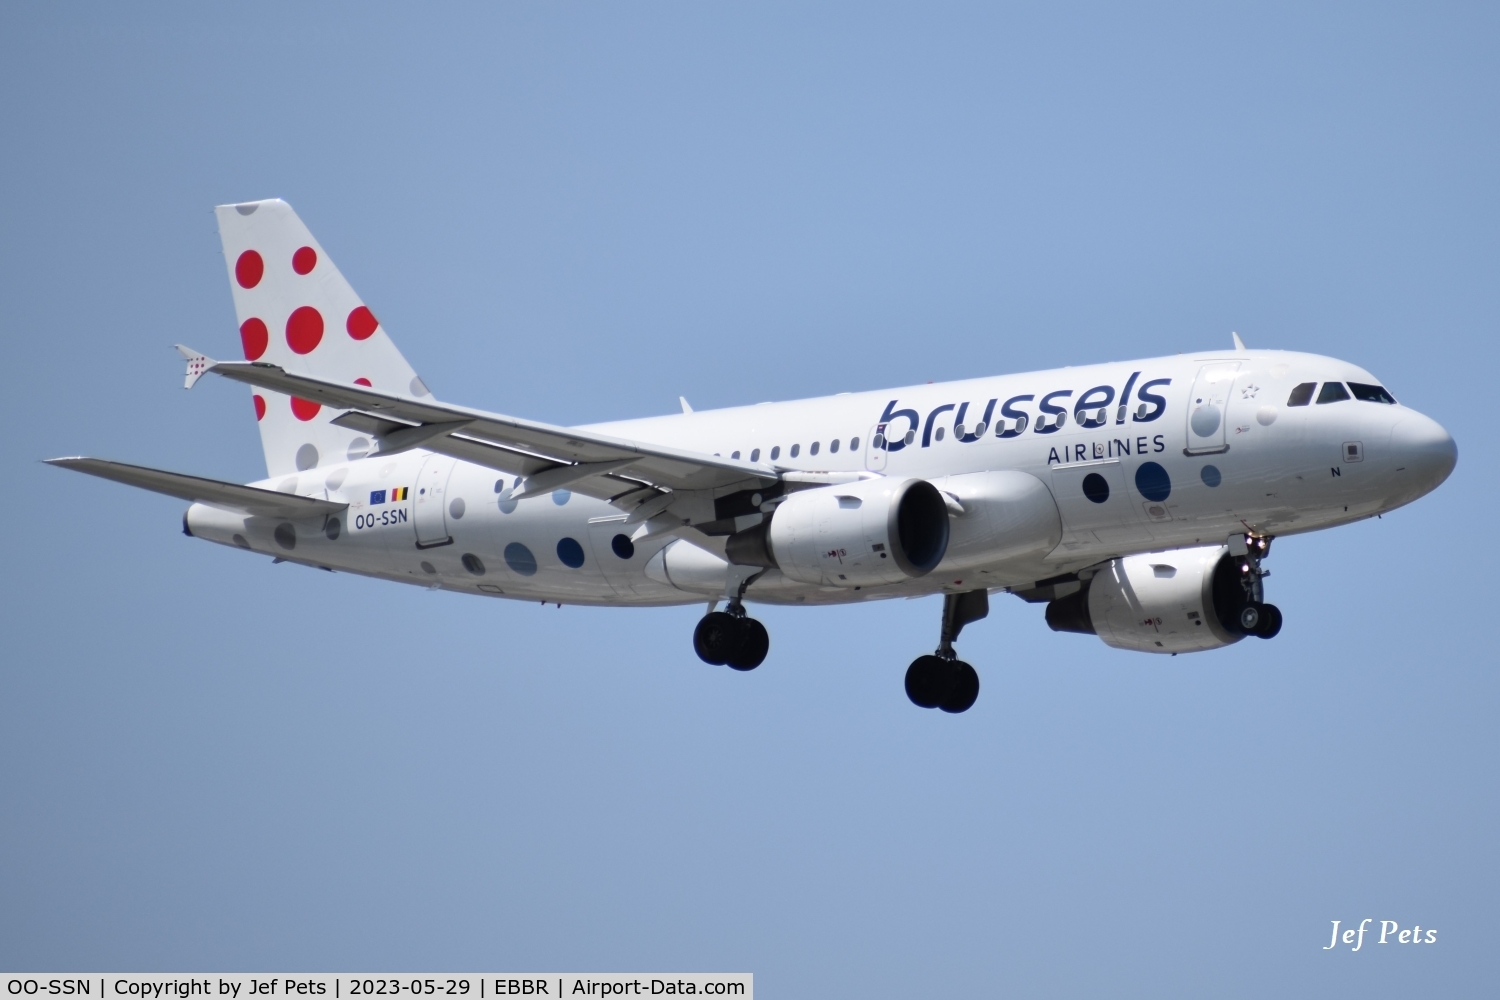 OO-SSN, 2003 Airbus A319-112 C/N 1963, Landing at Brussels Airport.